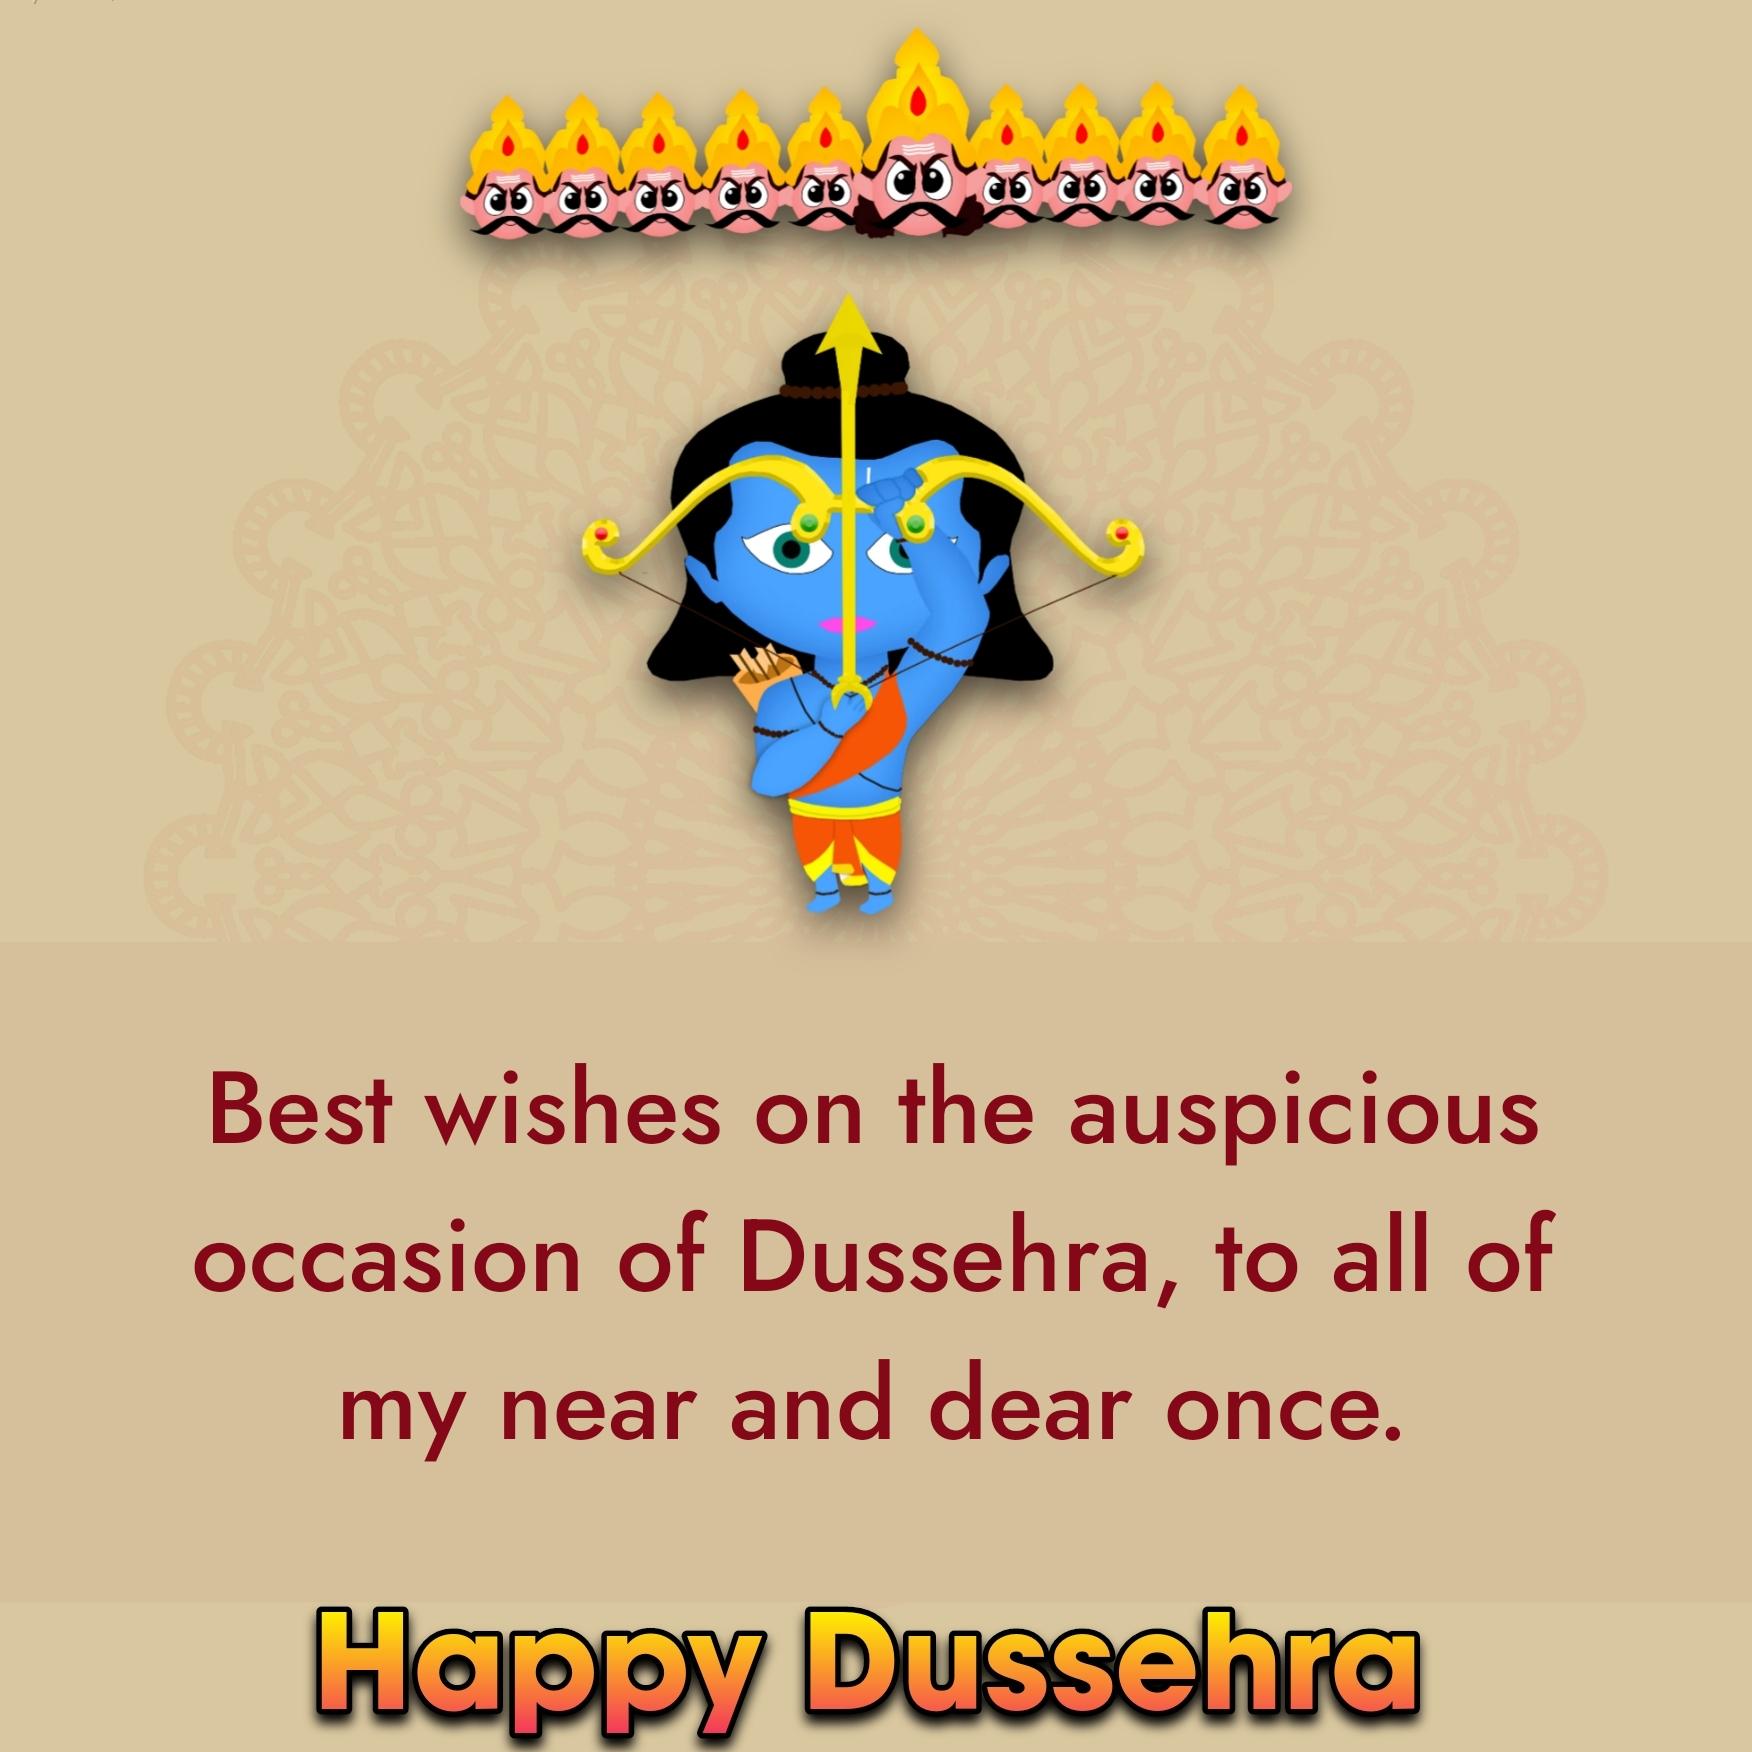 Best wishes on the auspicious occasion of Dussehra